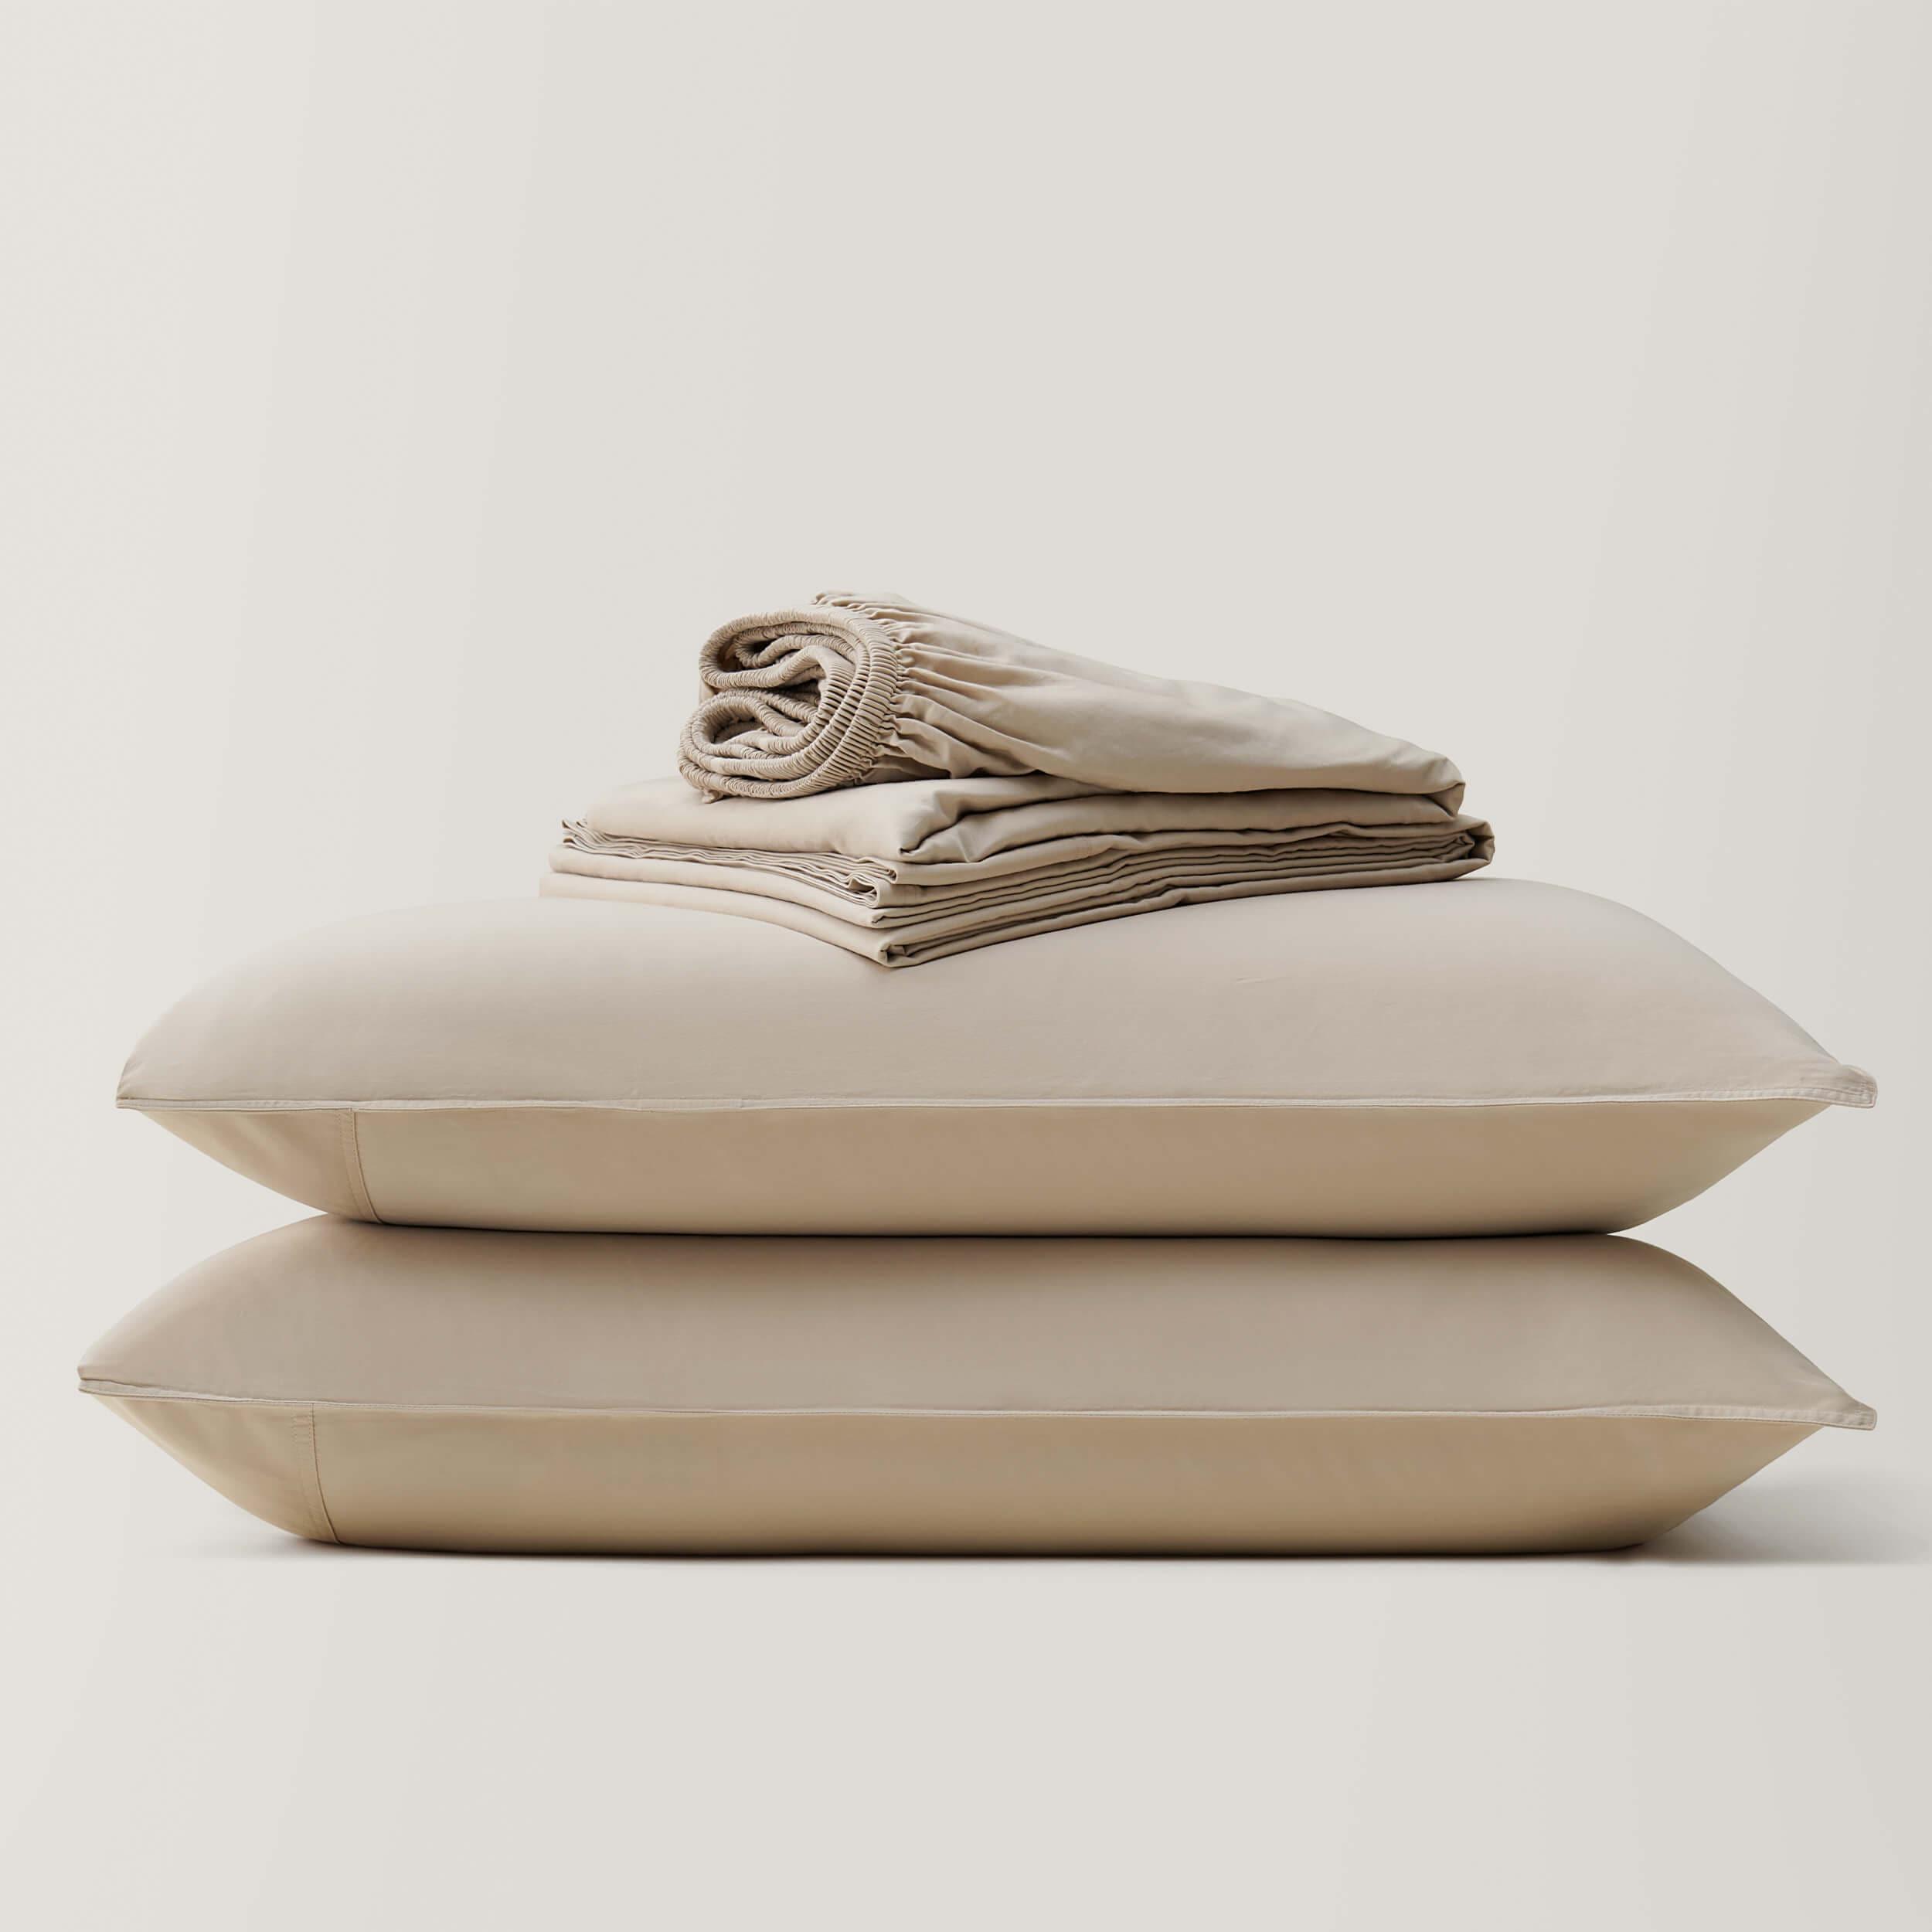 Transform your bedroom into a haven of relaxation with our California King sheet sets, designed for ultimate comfort.